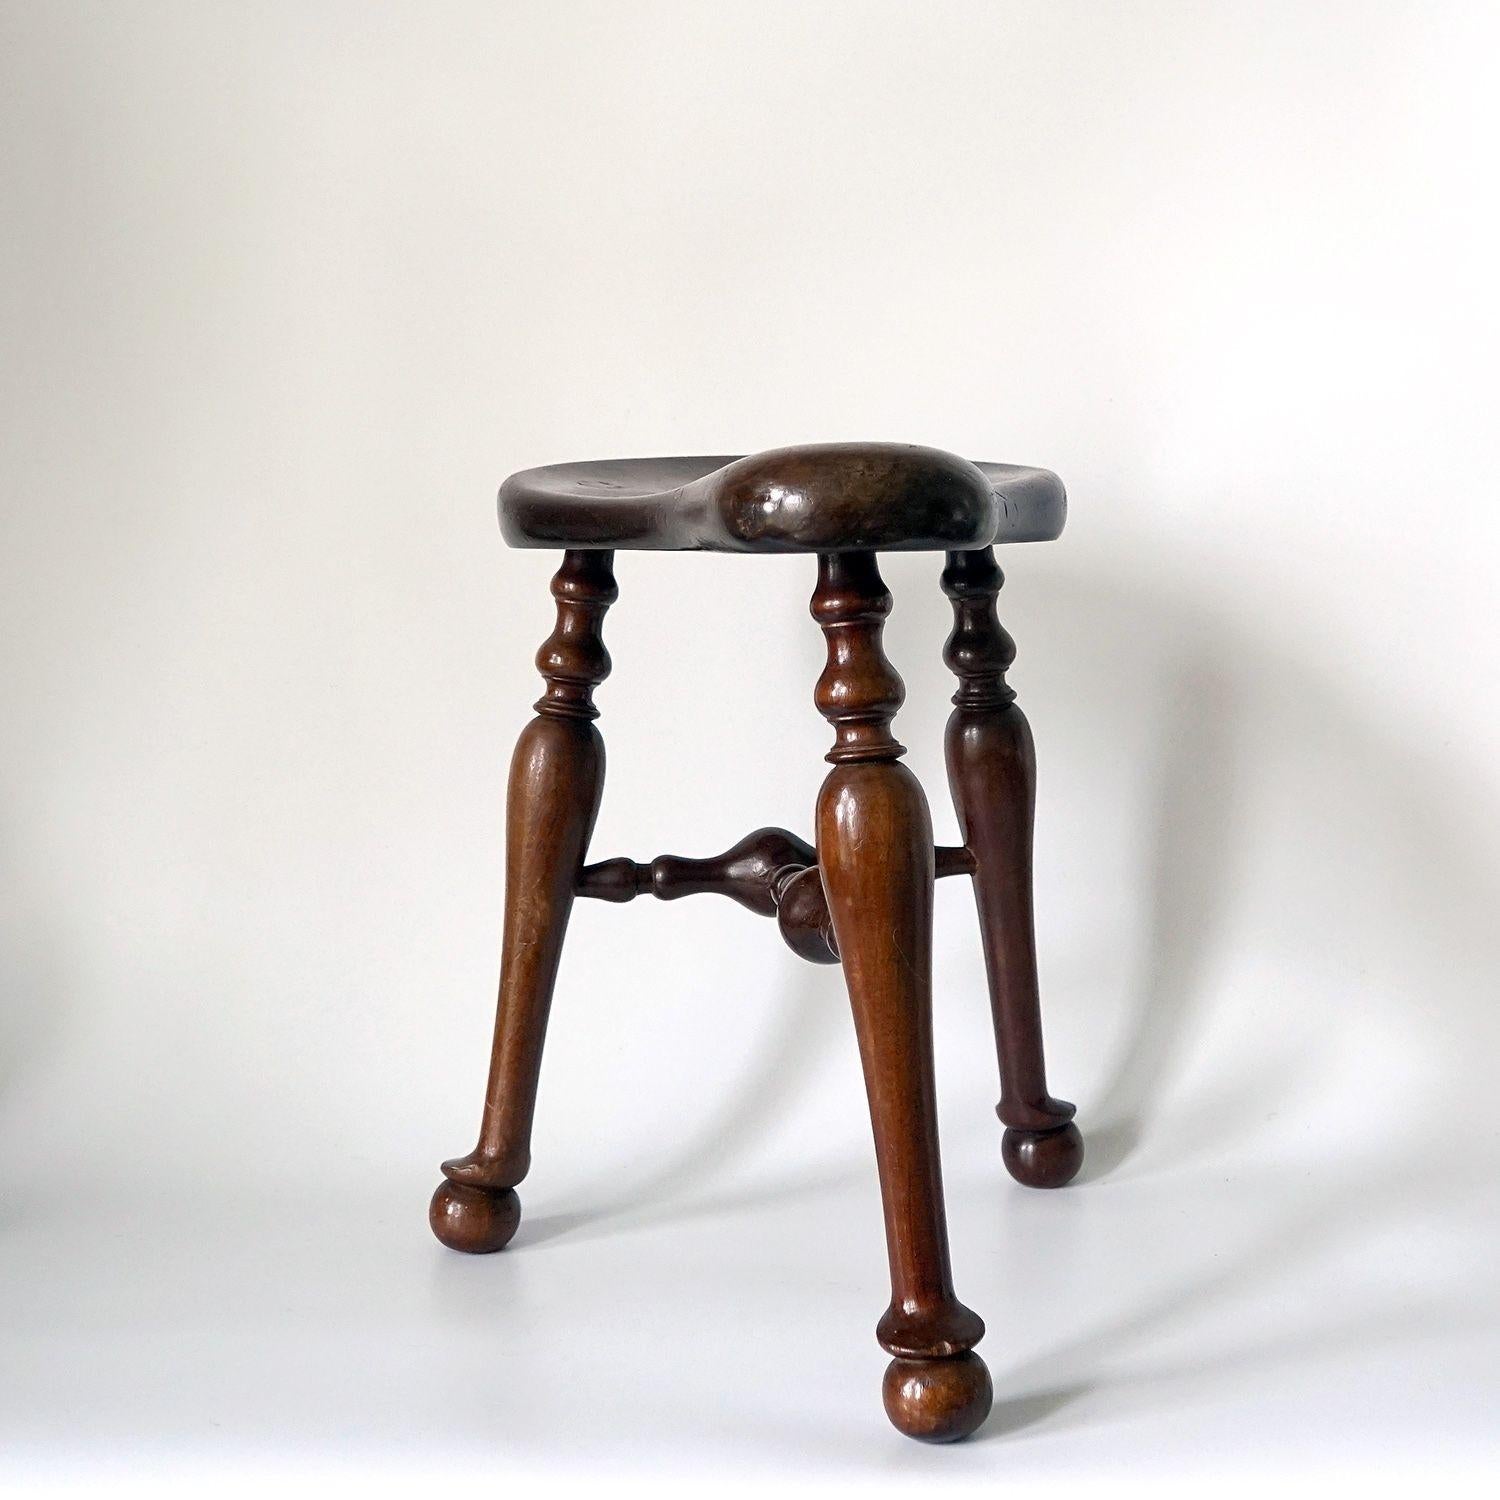 Turned Antique Victorian Walnut Cockfighting Stool by Jas Shoolbred, 1893